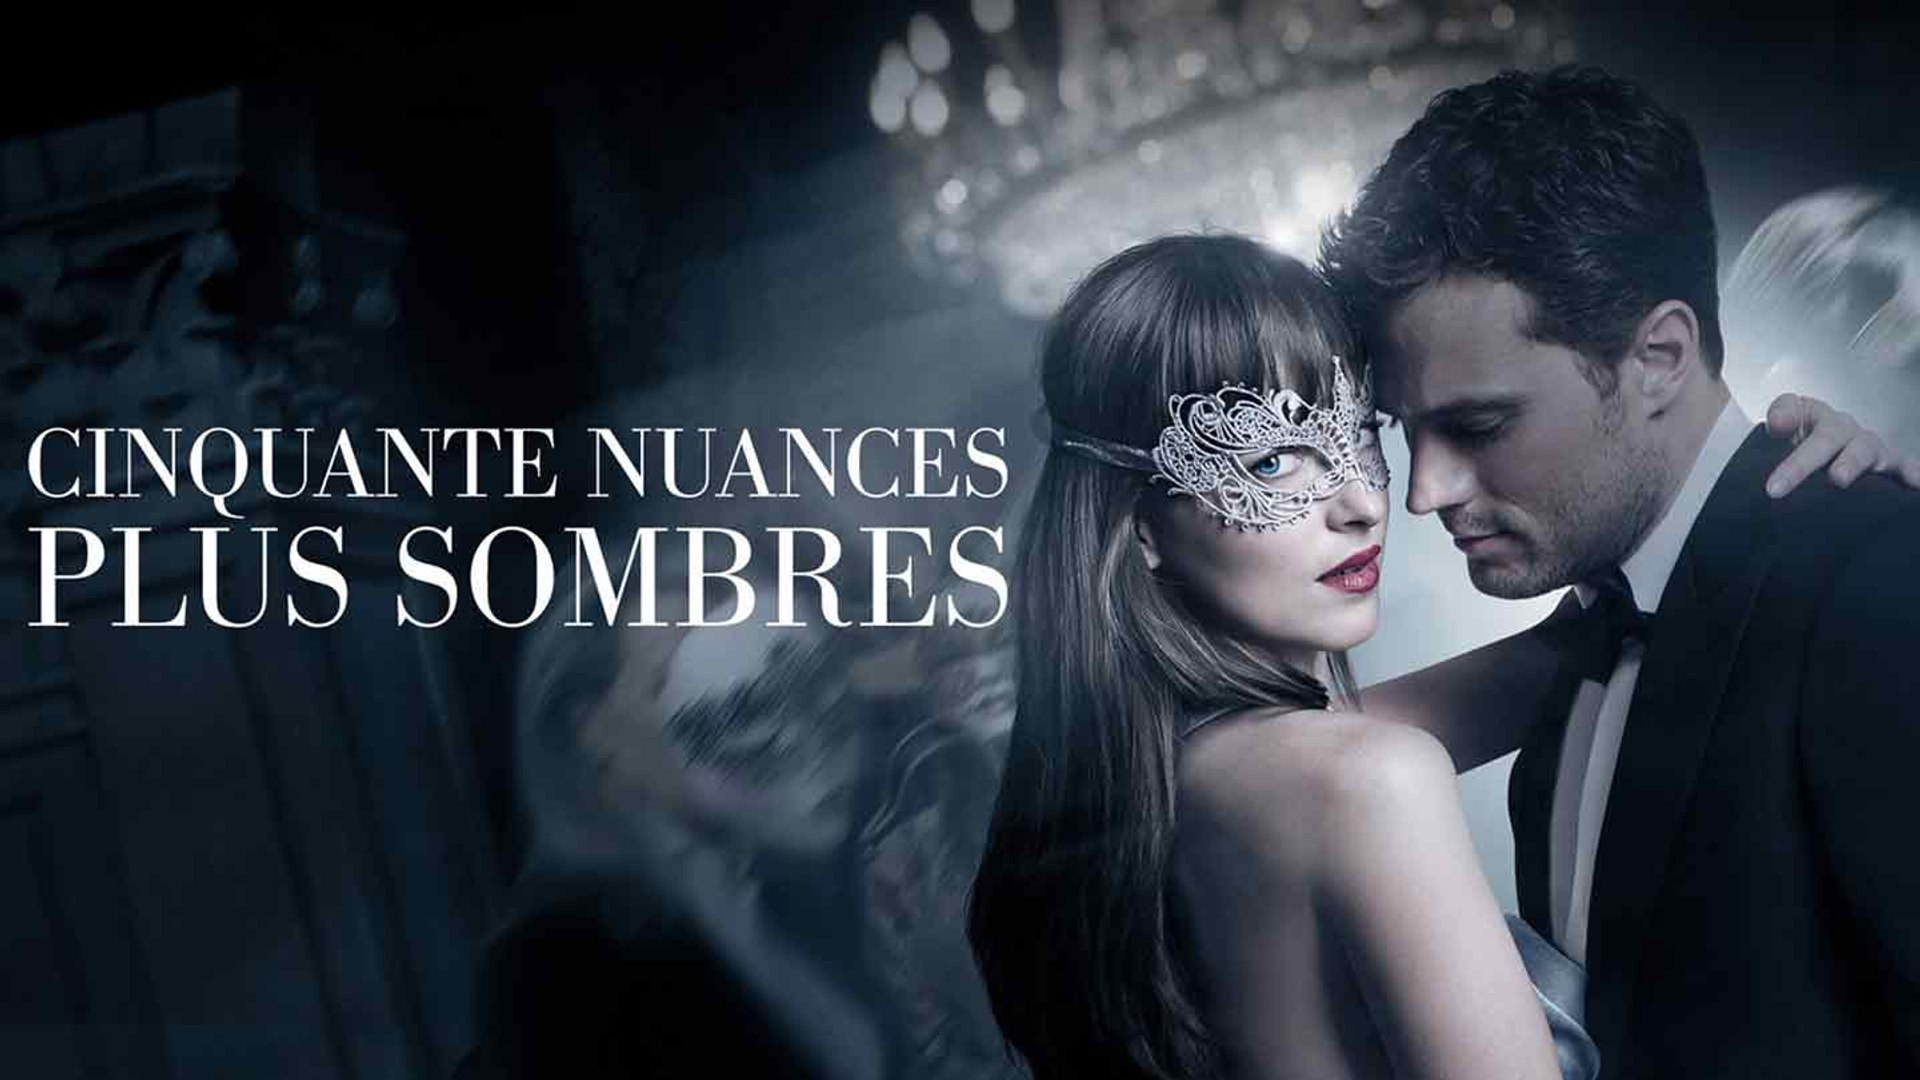 50 nuances plus sombres streaming vf complet kaiser permanente city of industry